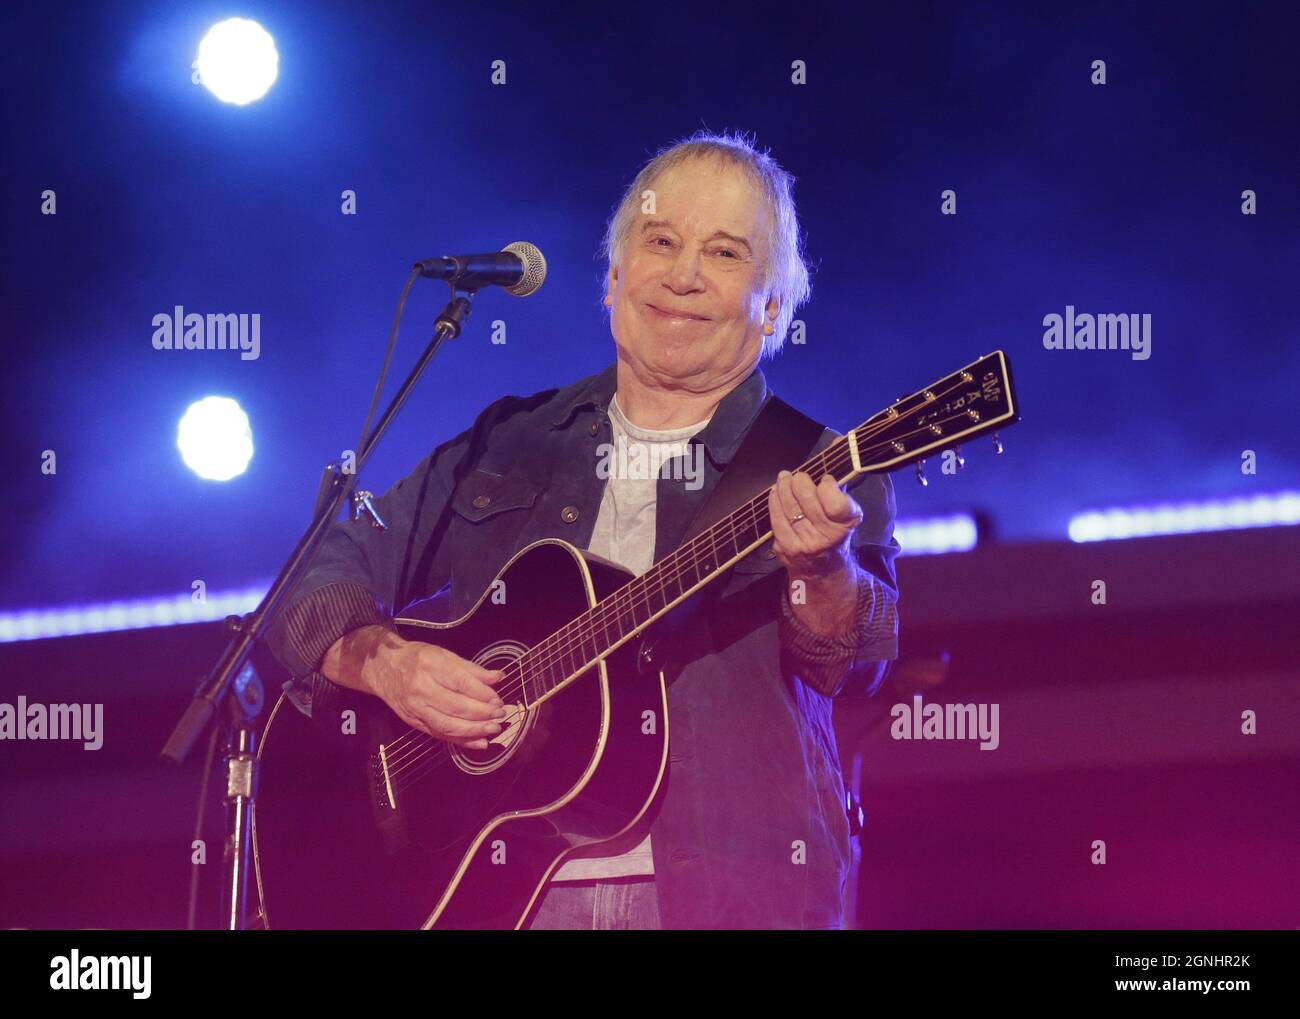 New York, United States. 26th Sep, 2021. Paul Simon performs at Global Citizen Live in New York City on Saturday, September 25, 2021. Global Citizen Live is a 24-hour global event starting on September 25 to unite the world to defend the planet and defeat poverty. Photo by John Angelillo/UPI Credit: UPI/Alamy Live News Stock Photo